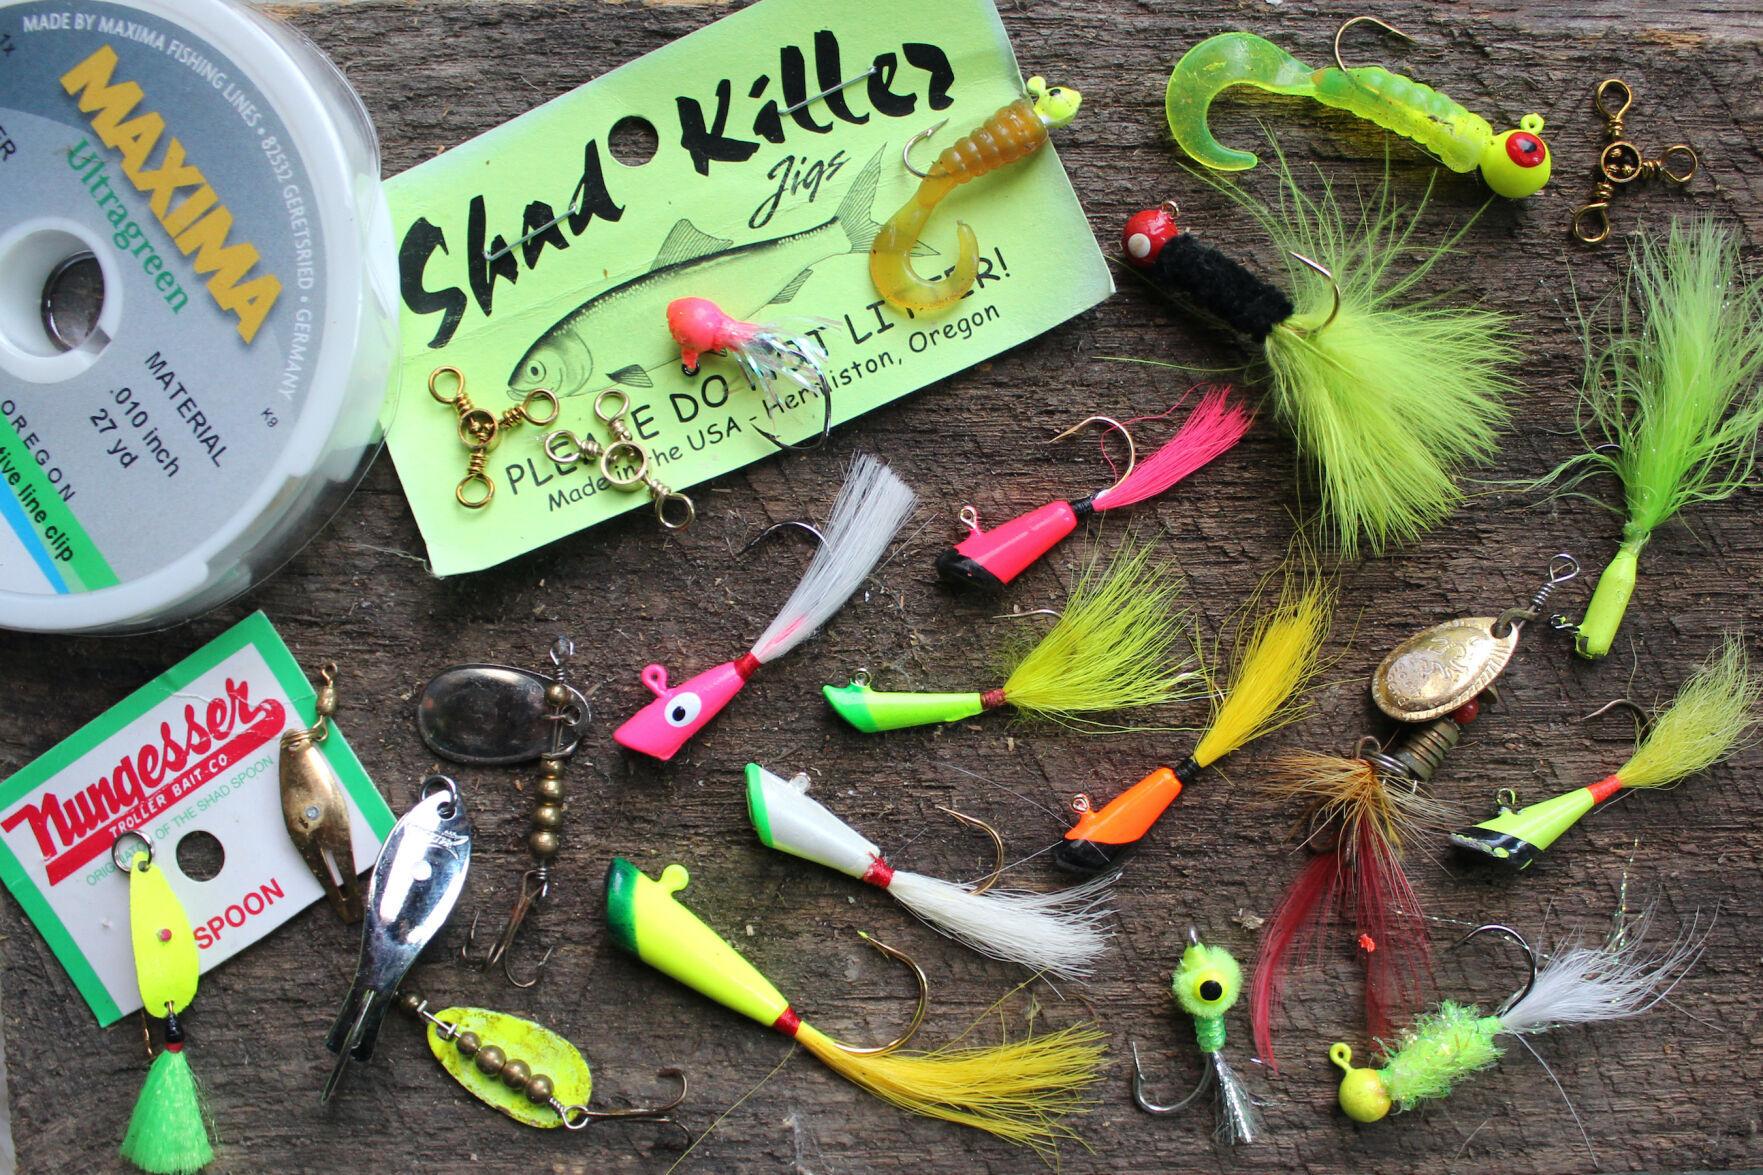 Ask an expert: how do I get better at using crankbaits? - Ontario